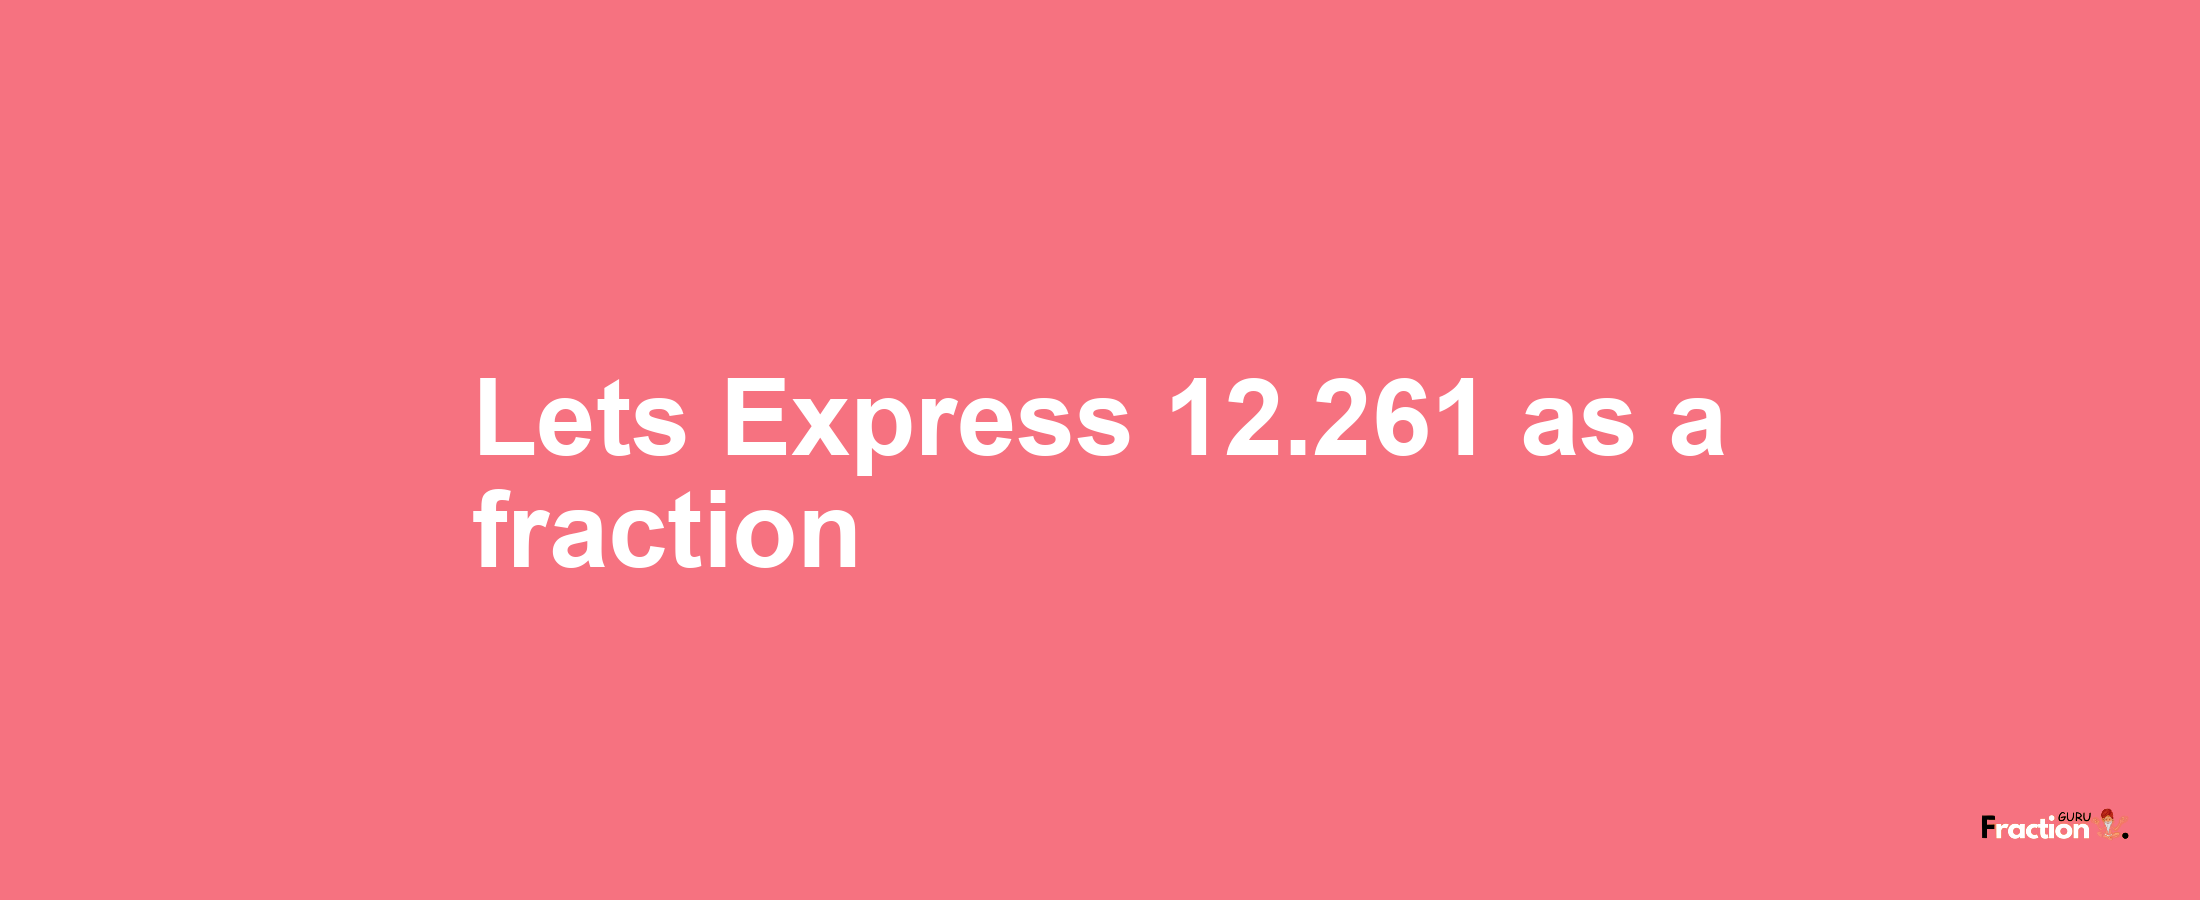 Lets Express 12.261 as afraction